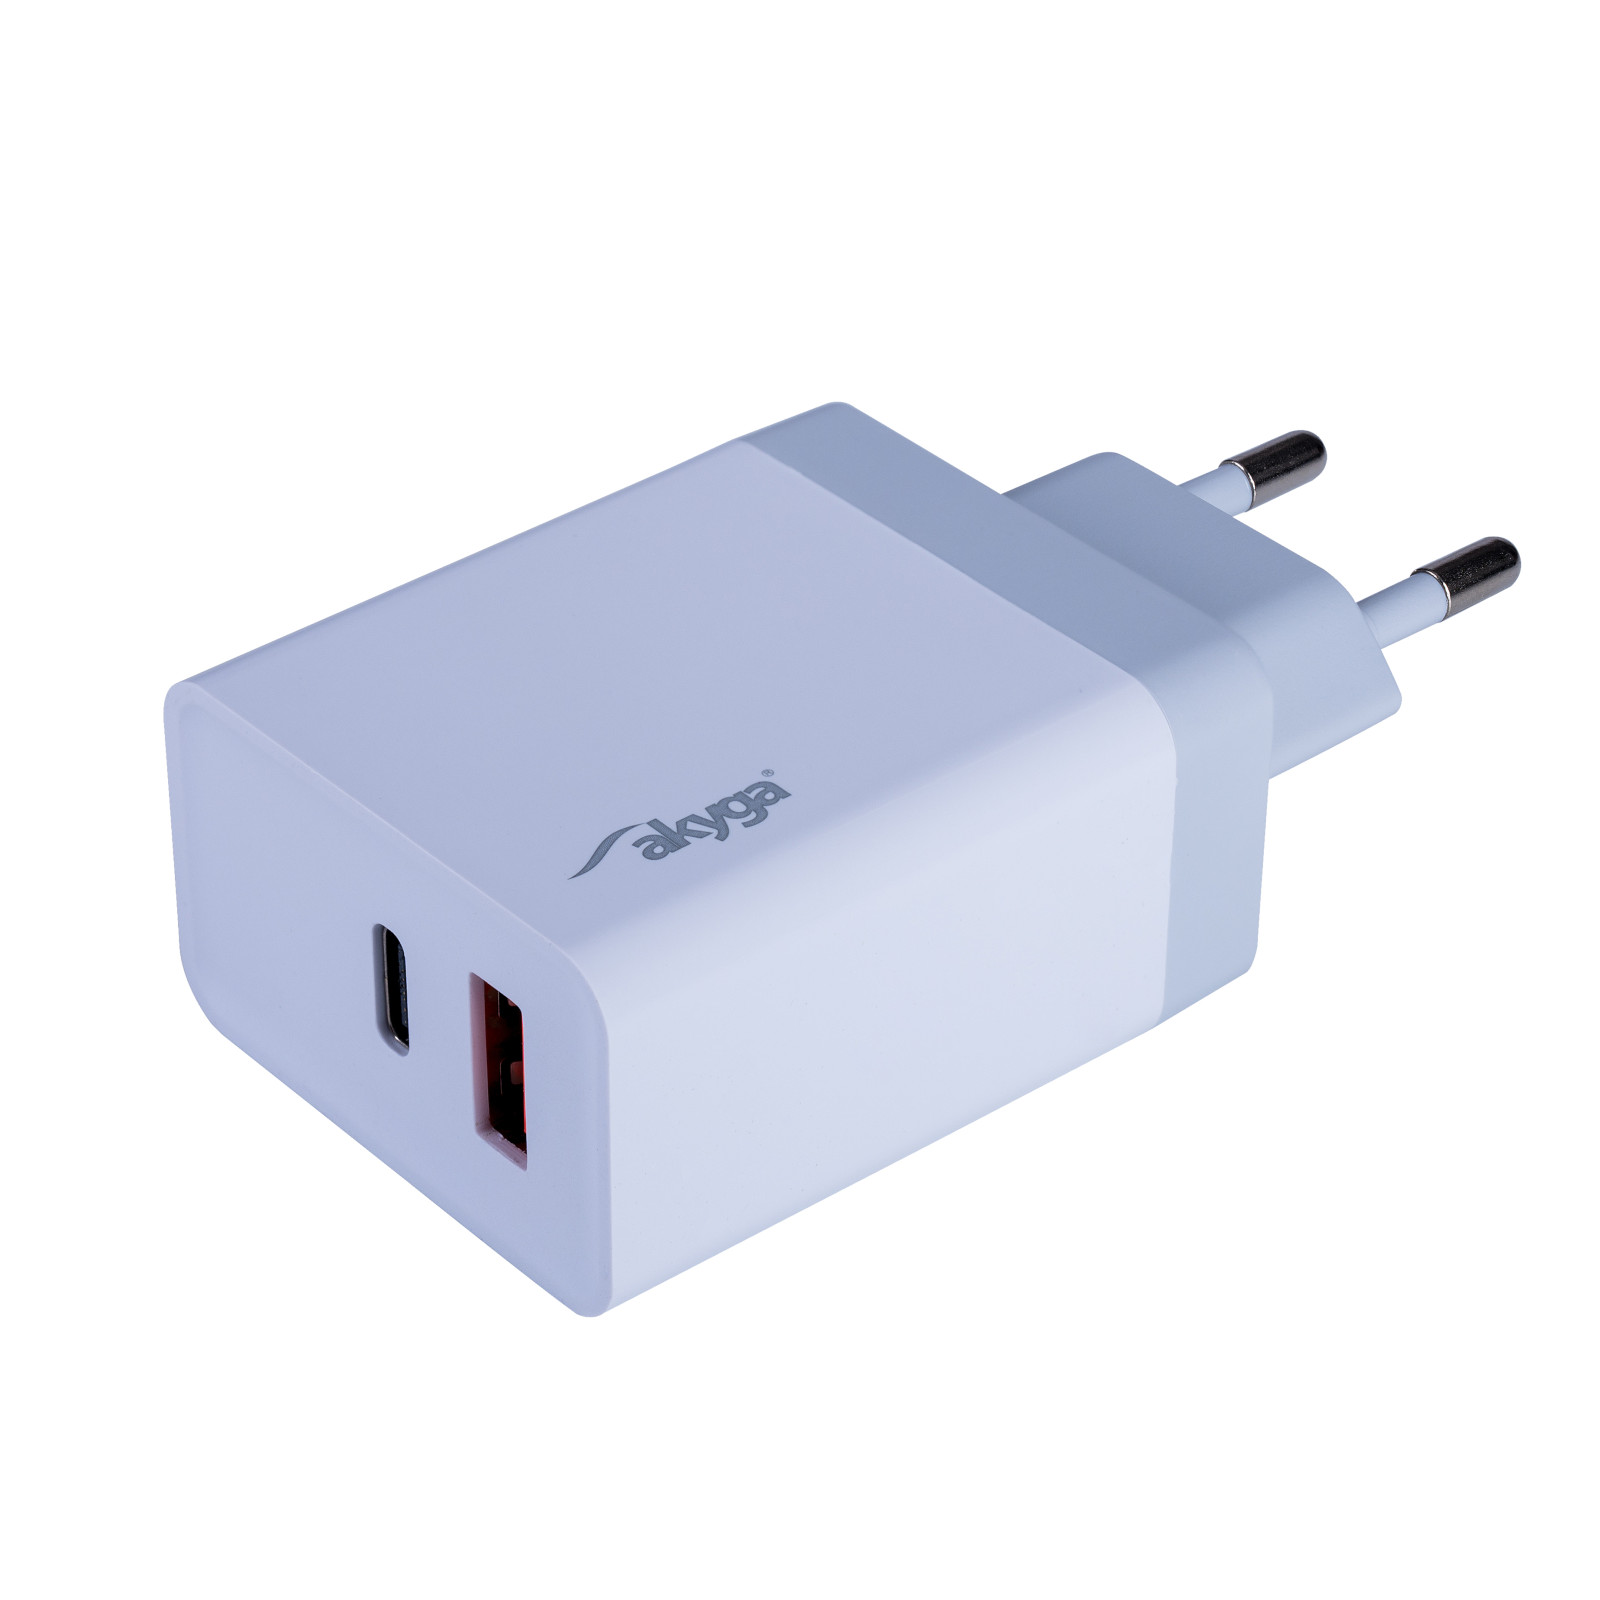 Main image USB Charger AK-CH-13 USB-A + USB-C PD 5-12V / max. 3A 36W Quick Charge 3.0